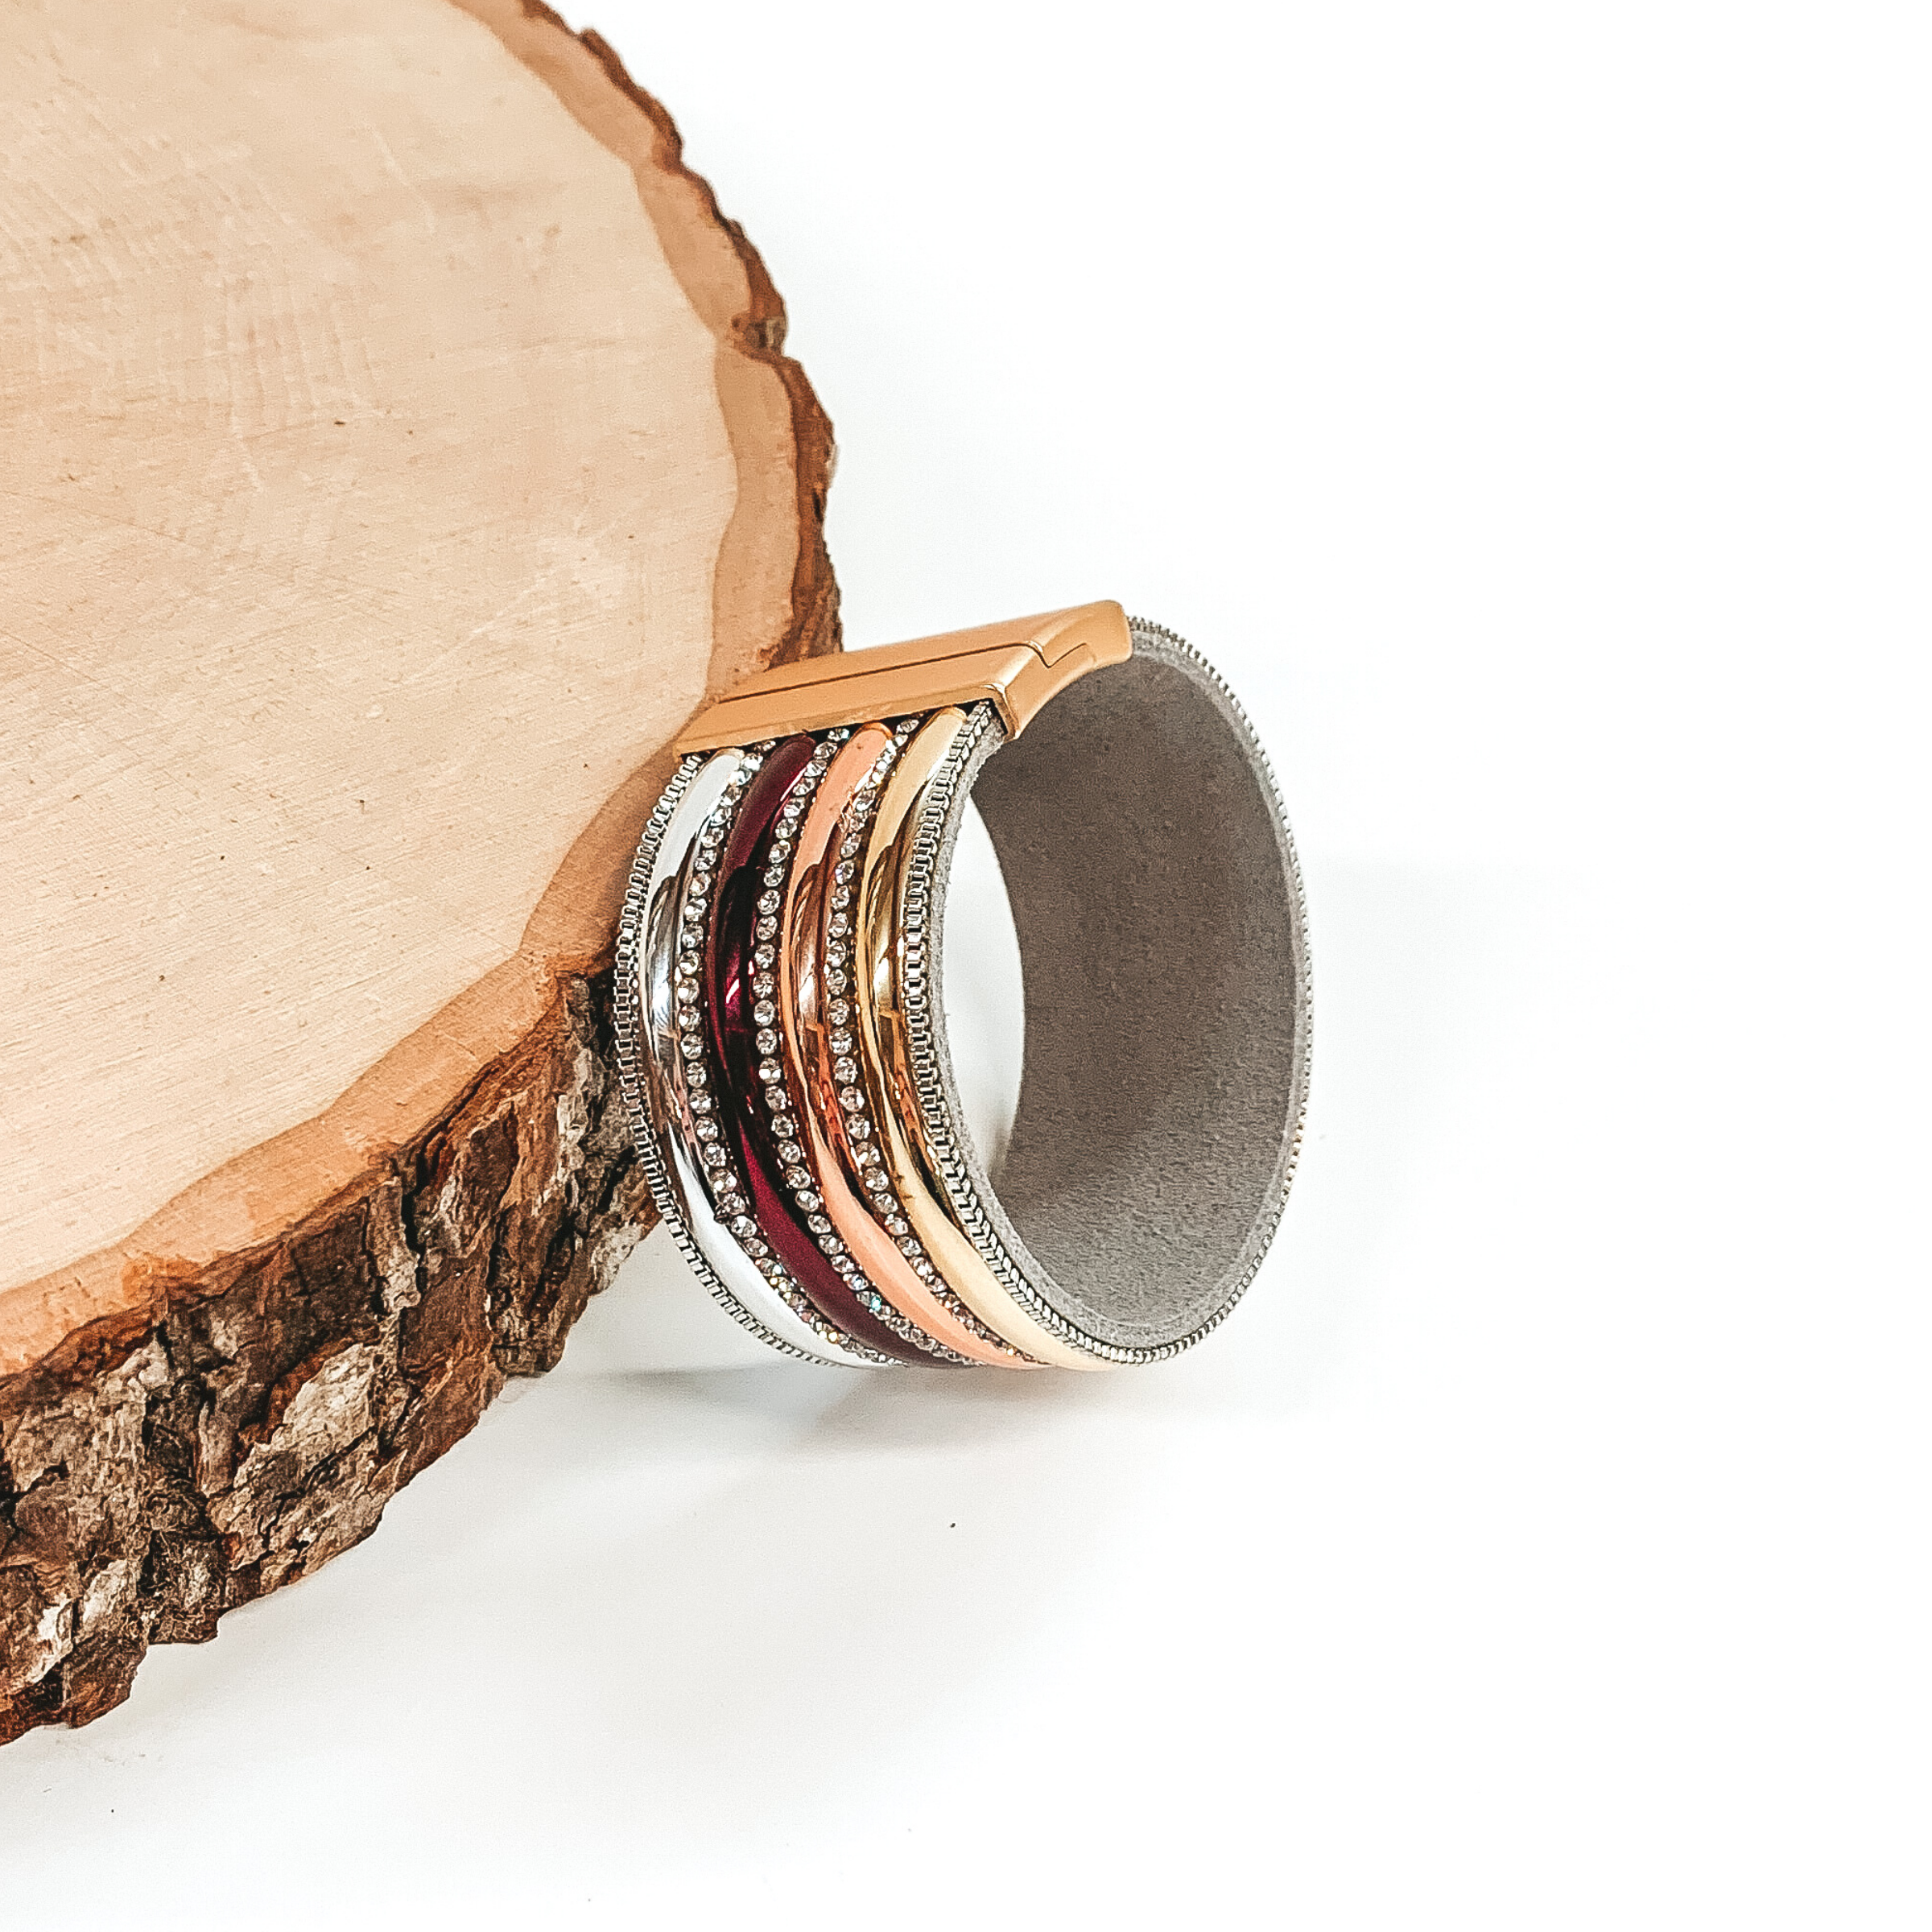 Wide band with rows of colors, including silver, maroon, rose gold, and gold, separated  by clear crystals. It has a gold clasp. This bracelet is pictured laying against a piece of wood on a white background. 